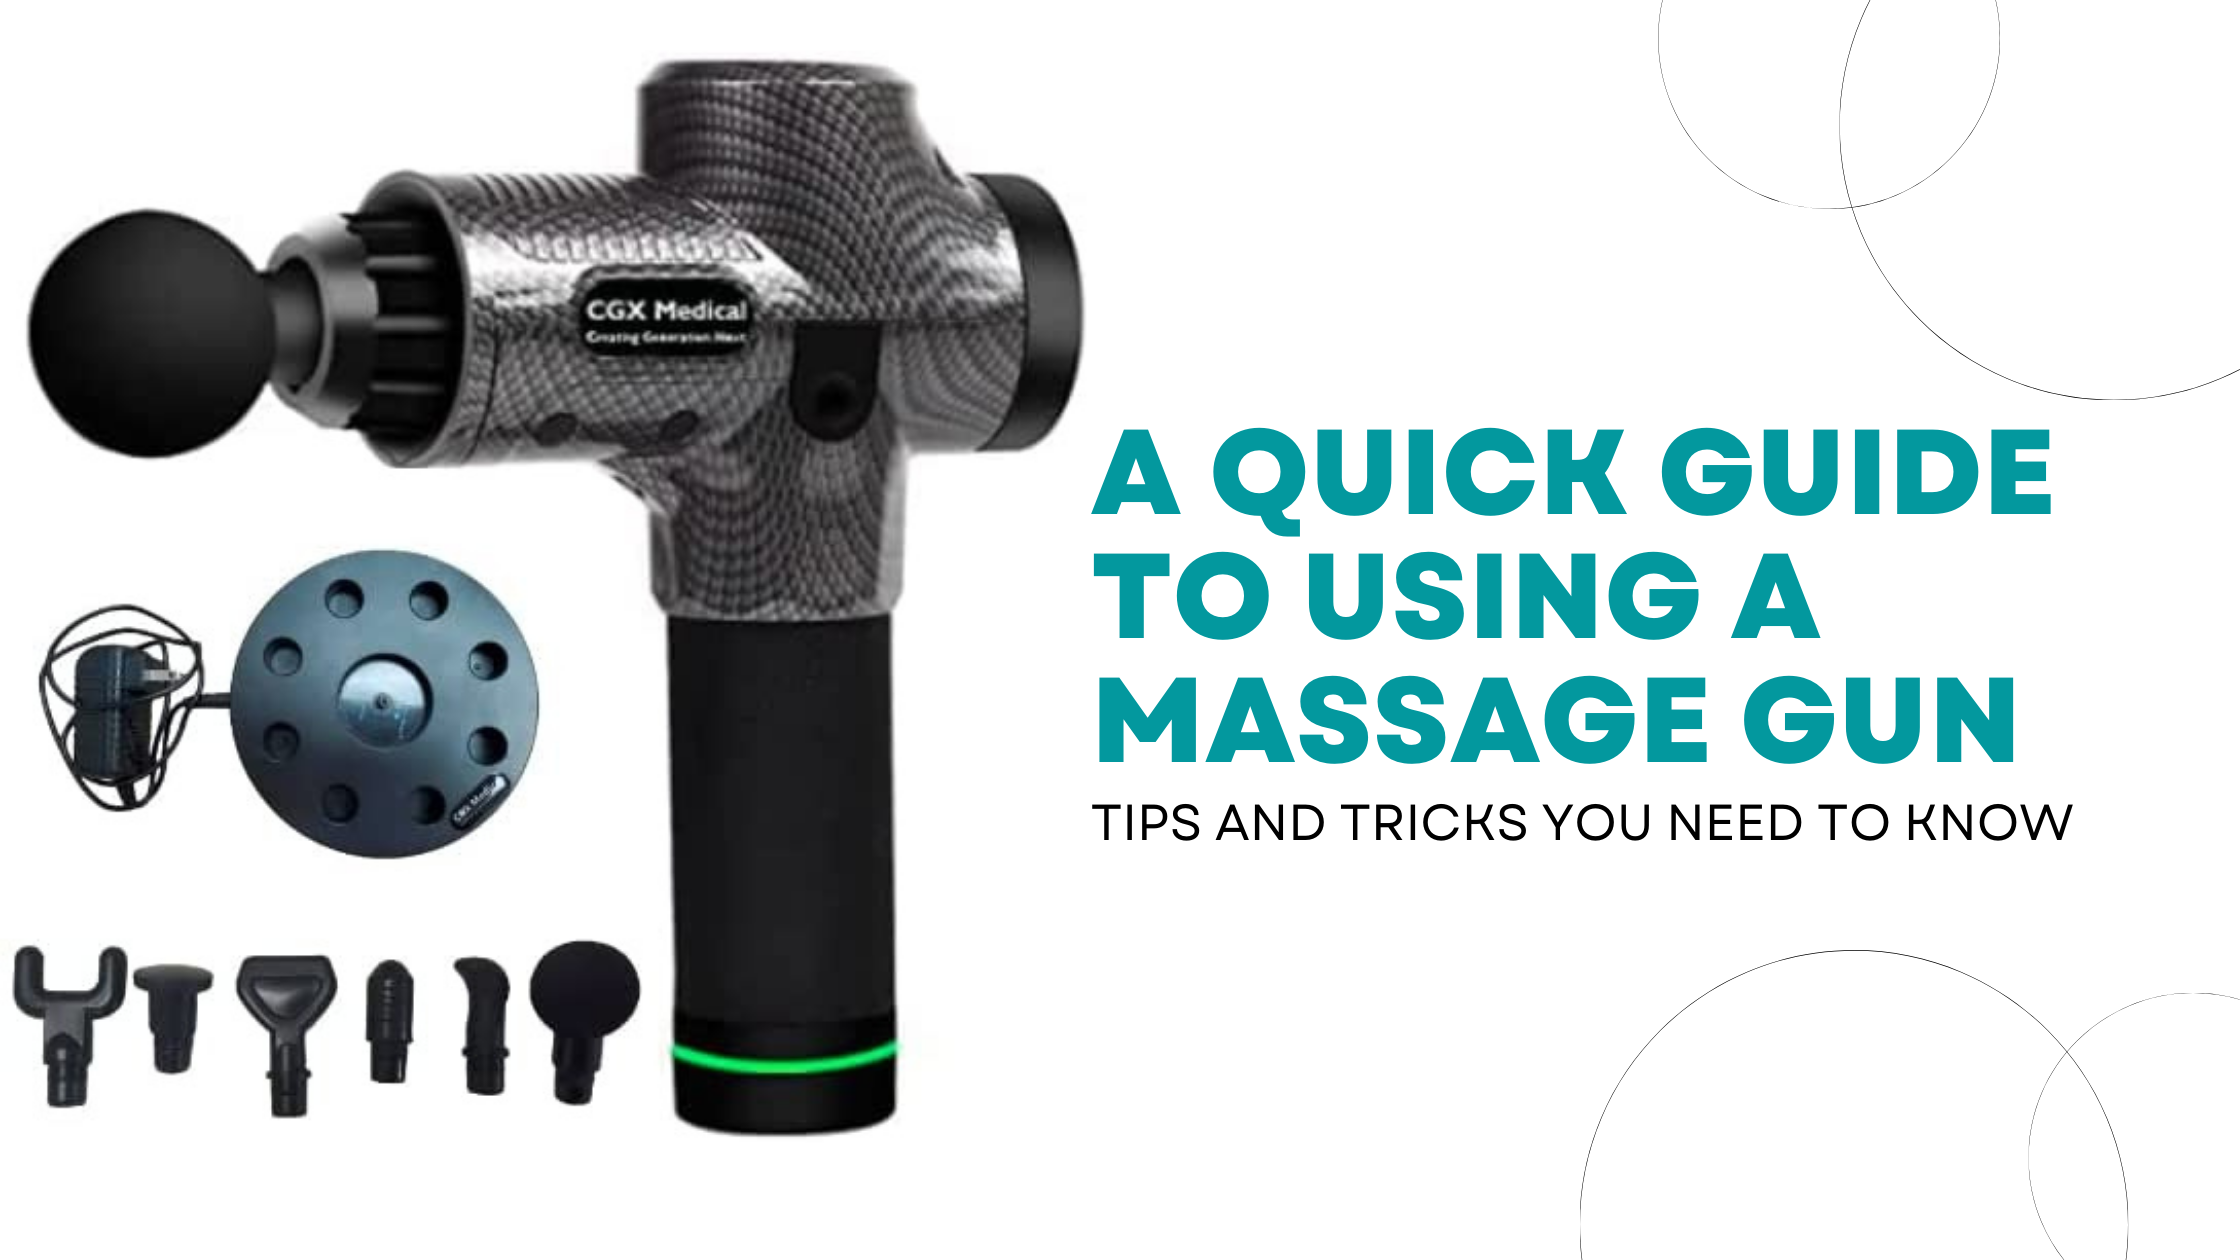 A Quick Guide to Using a Massage Gun: Tips and Tricks You Need To Know